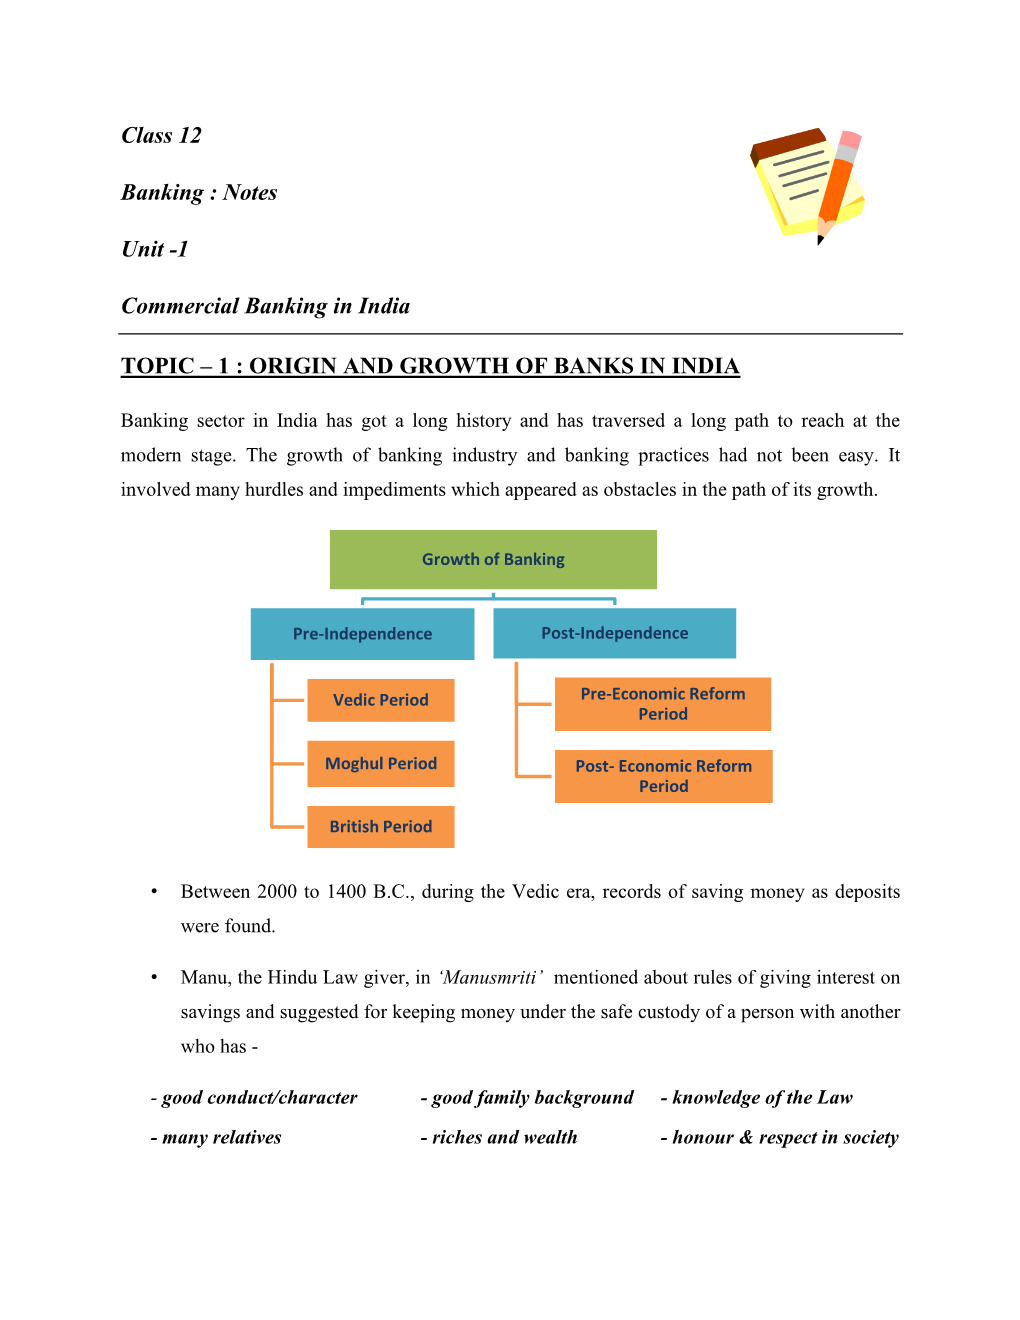 Class 12 Banking : Notes Unit -1 Commercial Banking in India TOPIC